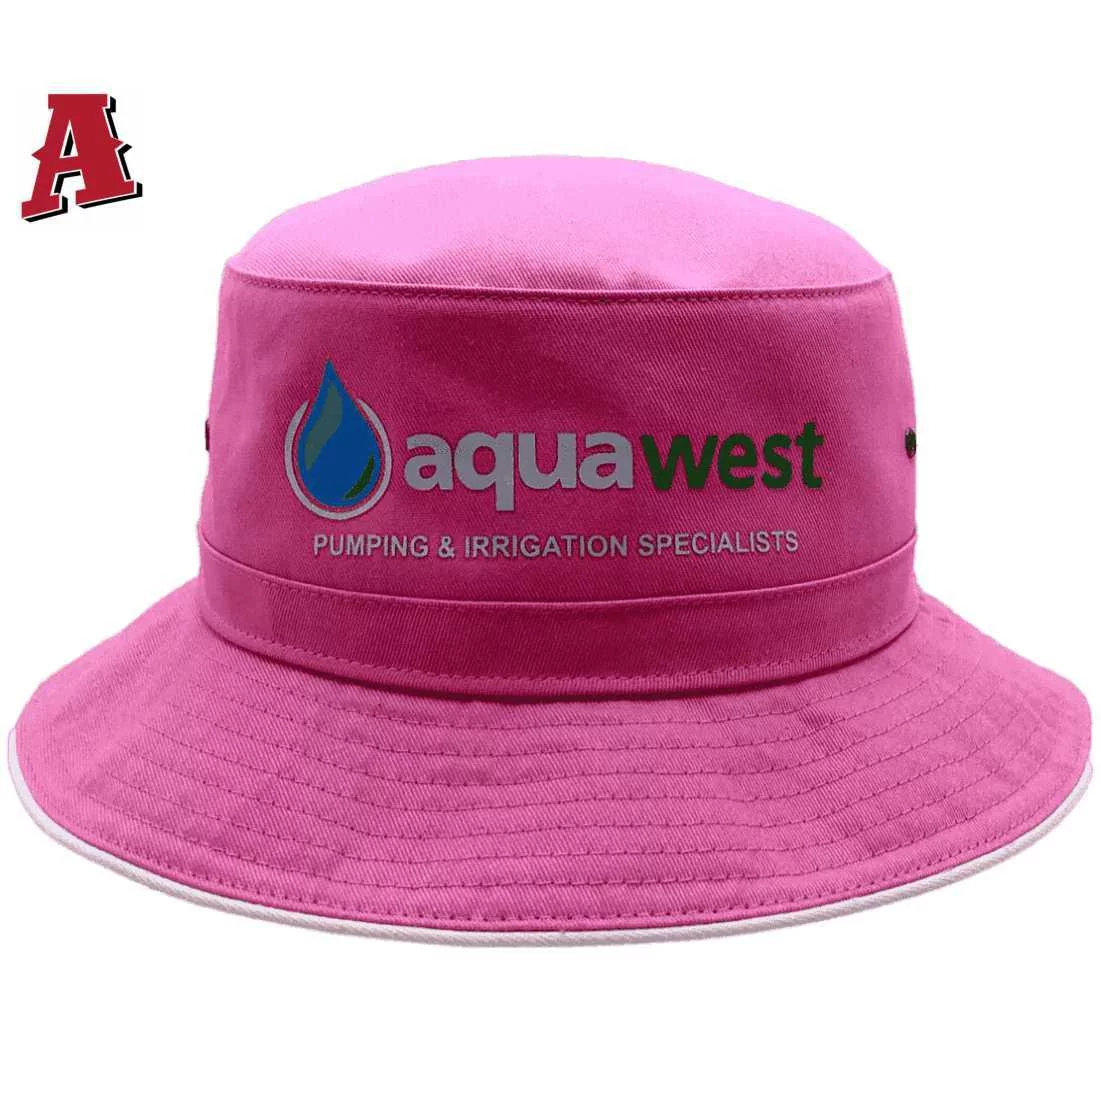 Aquawest Pumping and Irrigation Specialists Dubbo NSW Aussie Bucket Hat One Size Fits All with Adjustable Toggle Crown and Optional Brim size 5cm - 7.5cm Pink